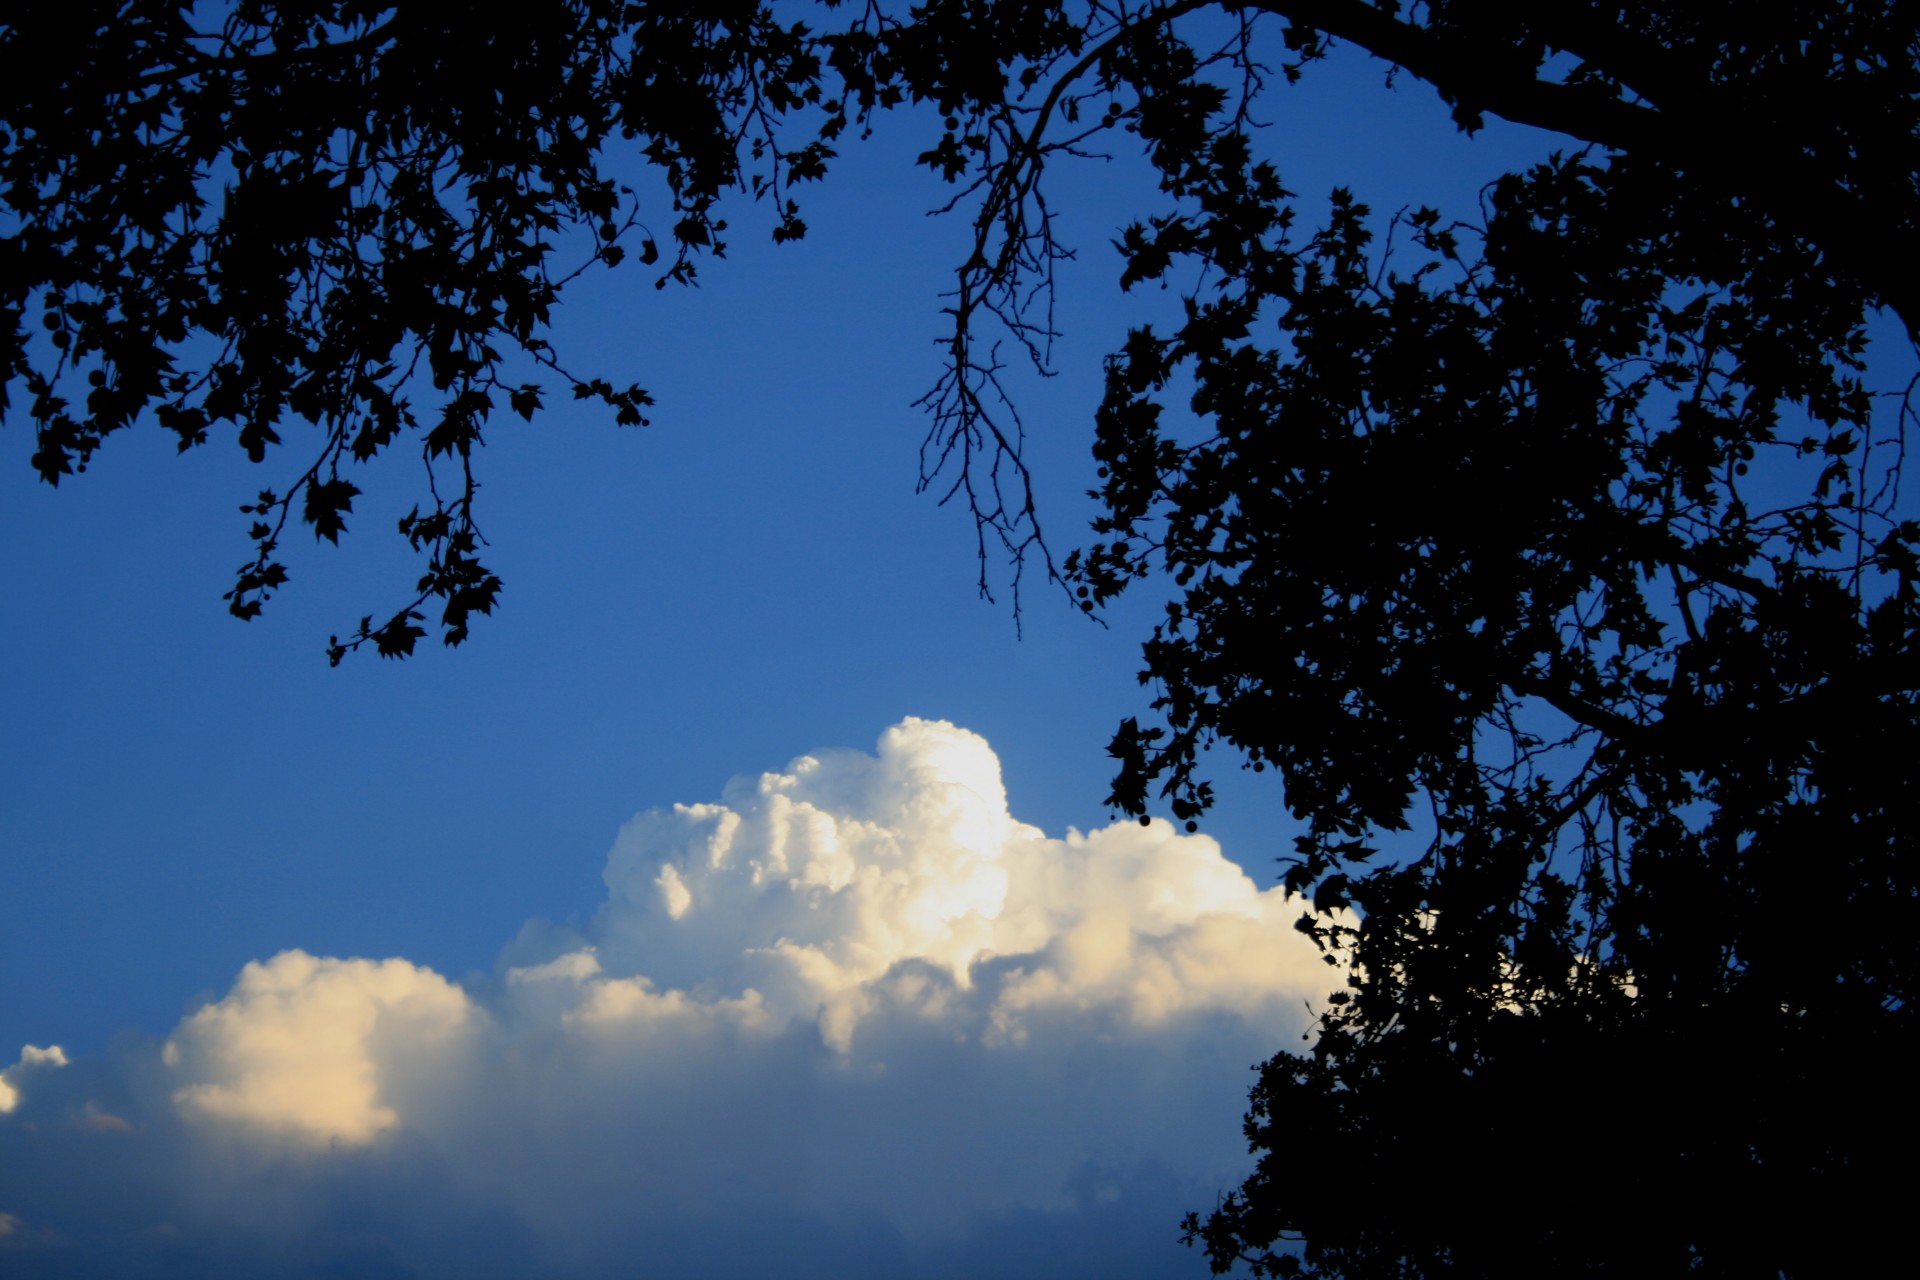 foliage silhouette and large white cloud